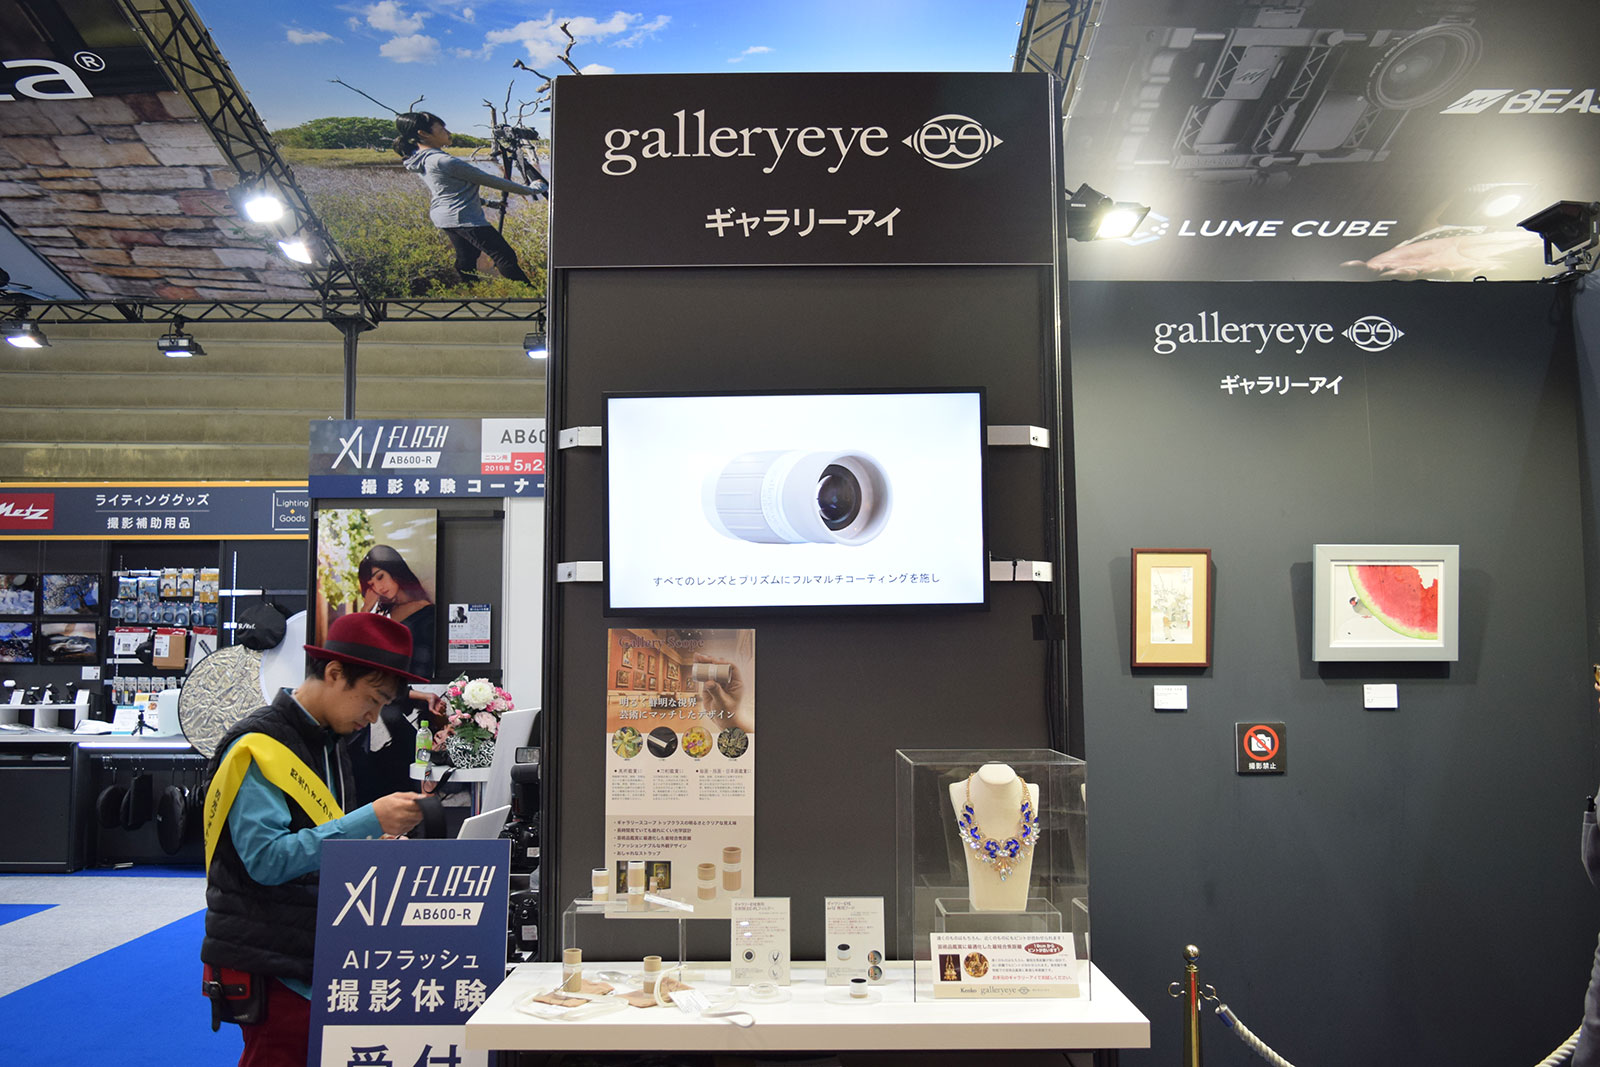 Kenko Galleryeye, Kenko's most elegant monoculars deserved a corner under the spotlights, where you could experience their magnifying power and outstanding portability, especially suited for galleries and museums.